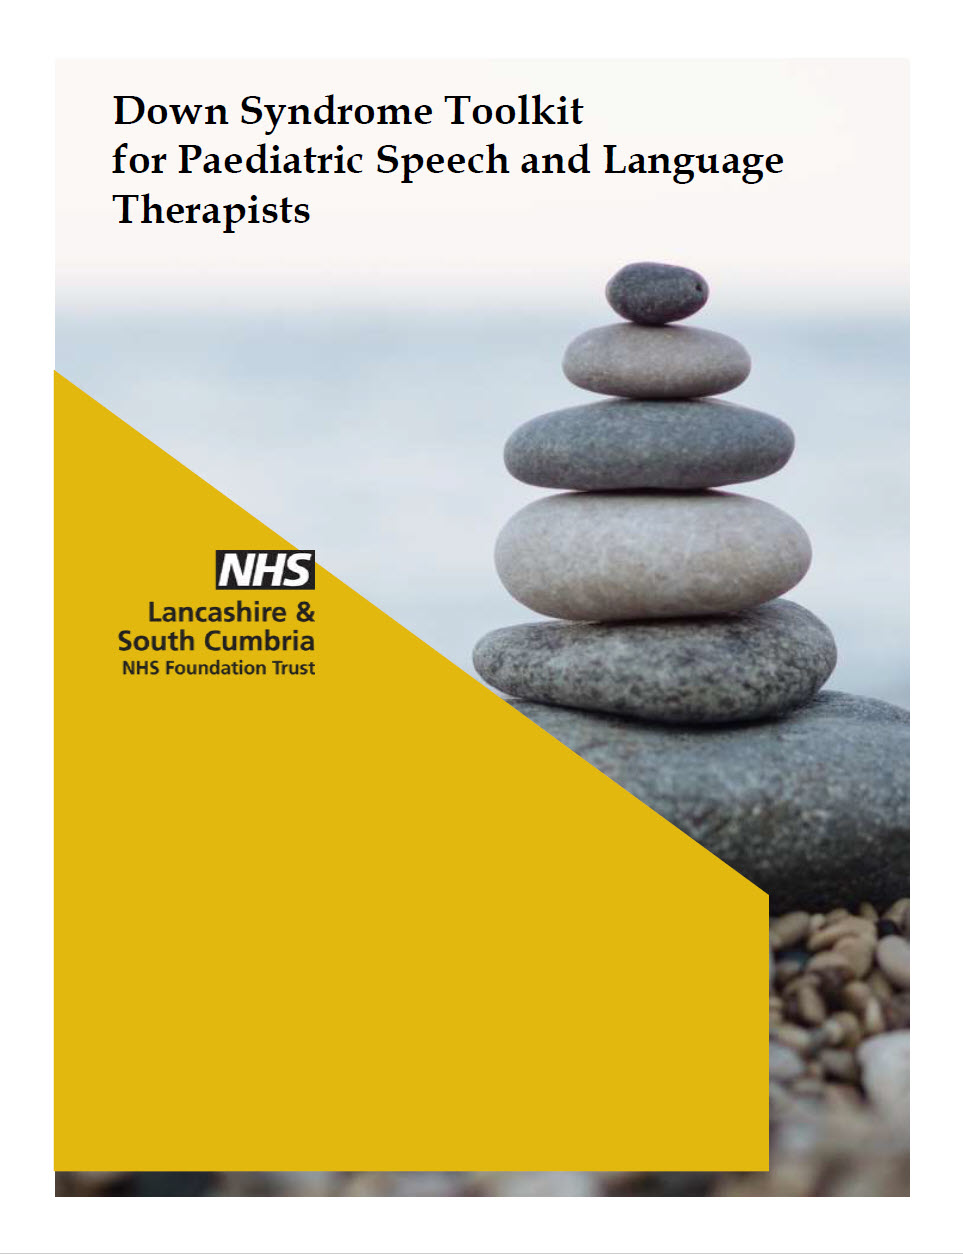 The cover of the Down Syndrome Toolkit for Paediatric Speech and Language Therapists.